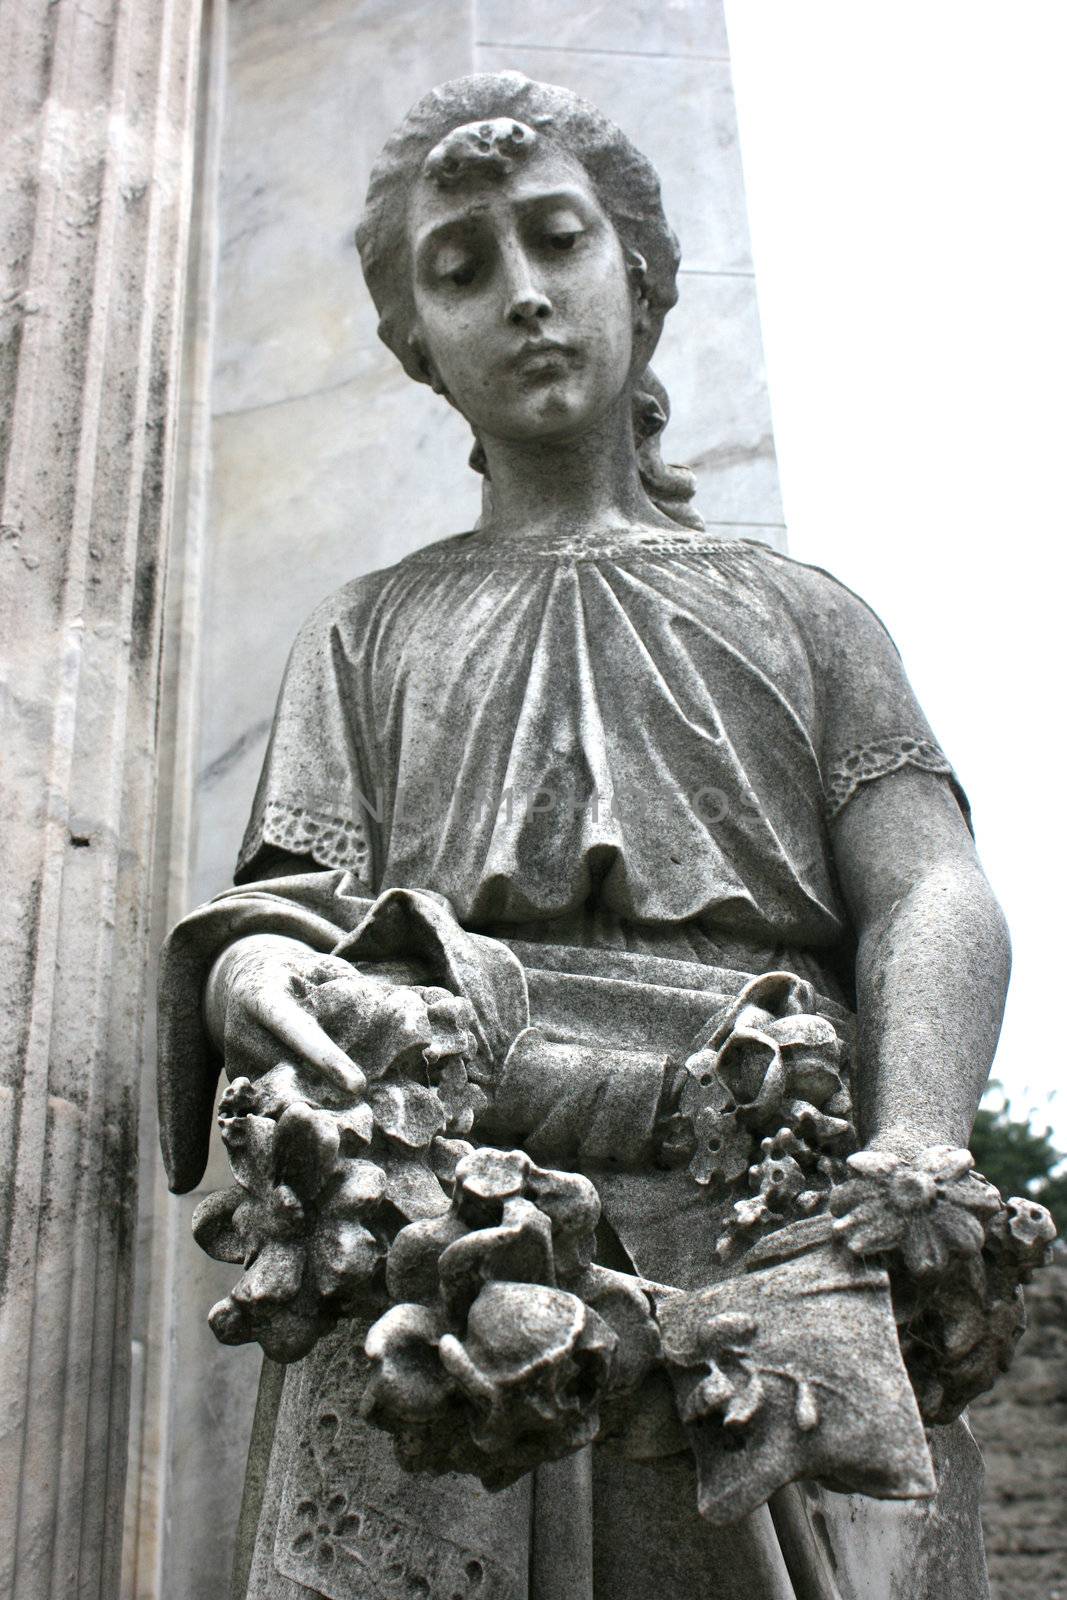 Statue in the Cemetery of Recoleta, Buenos Aires, Argentina.